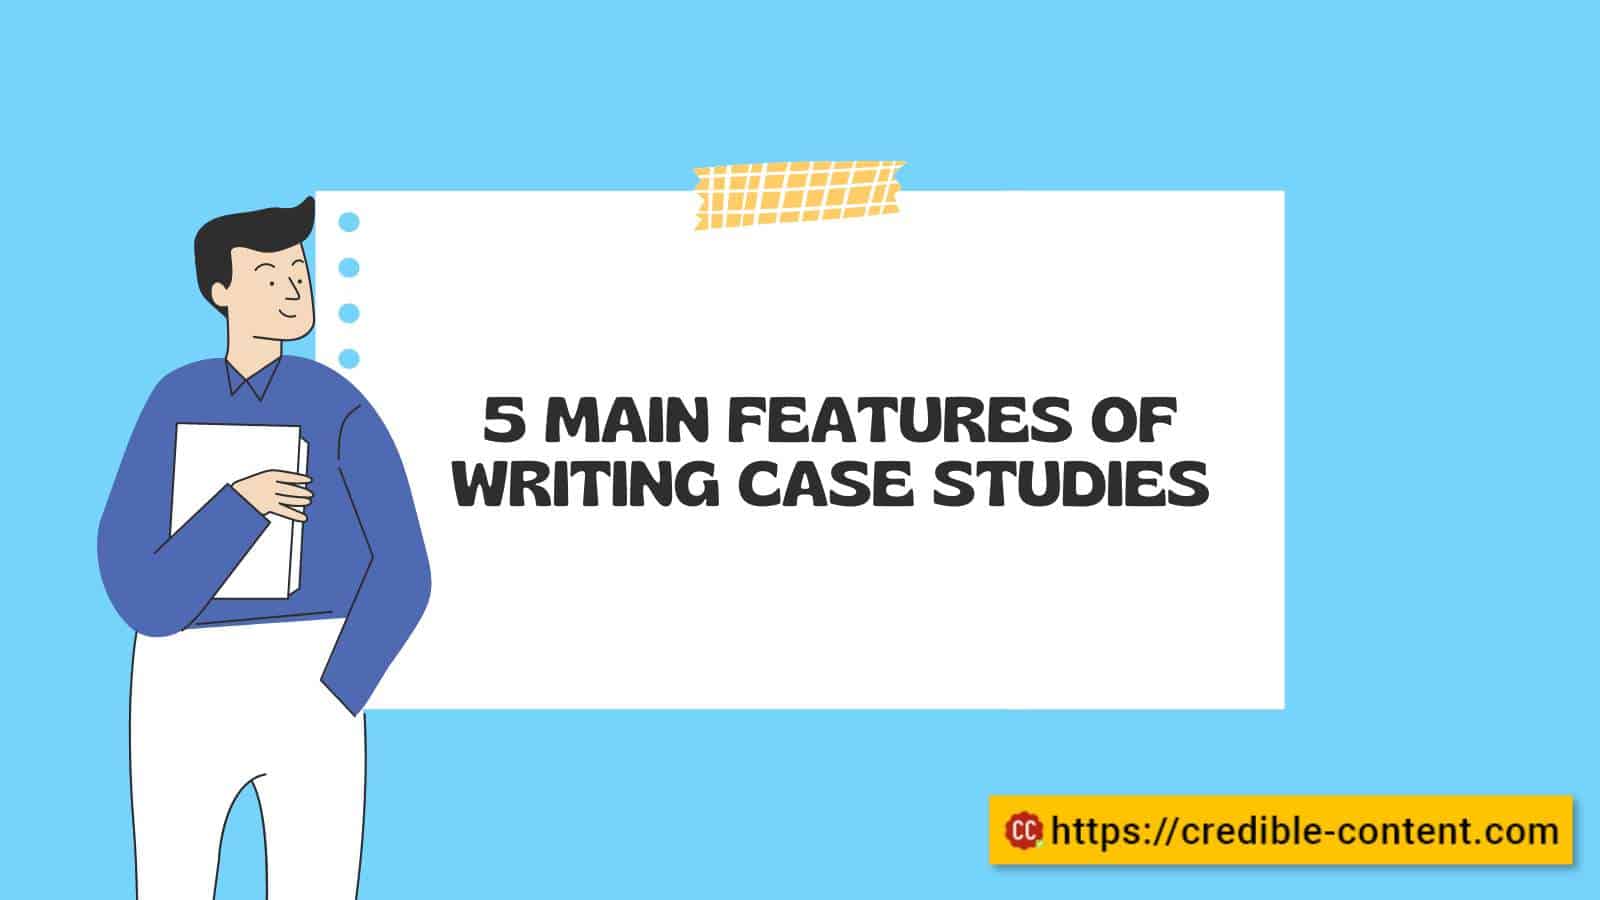 5 main features of writing case studies